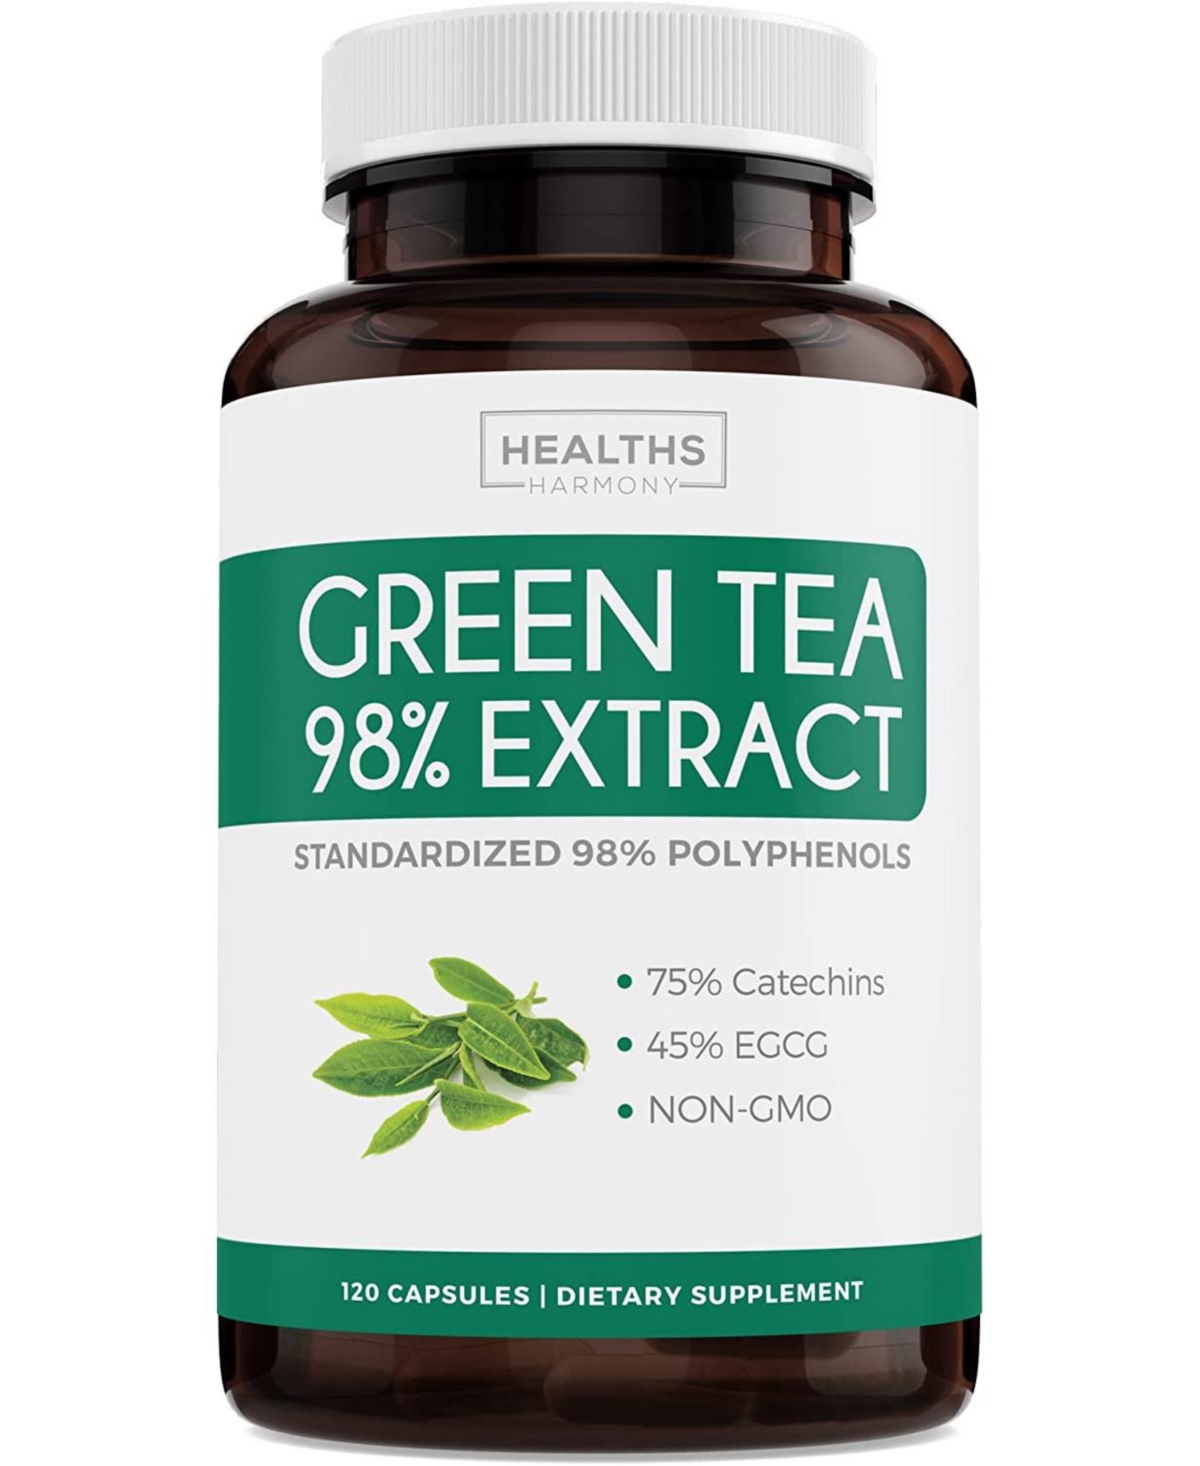 Green Tea 98% Extract with Egcg - 120 Capsules (Non-gmo) for Natural Metabolism Boost